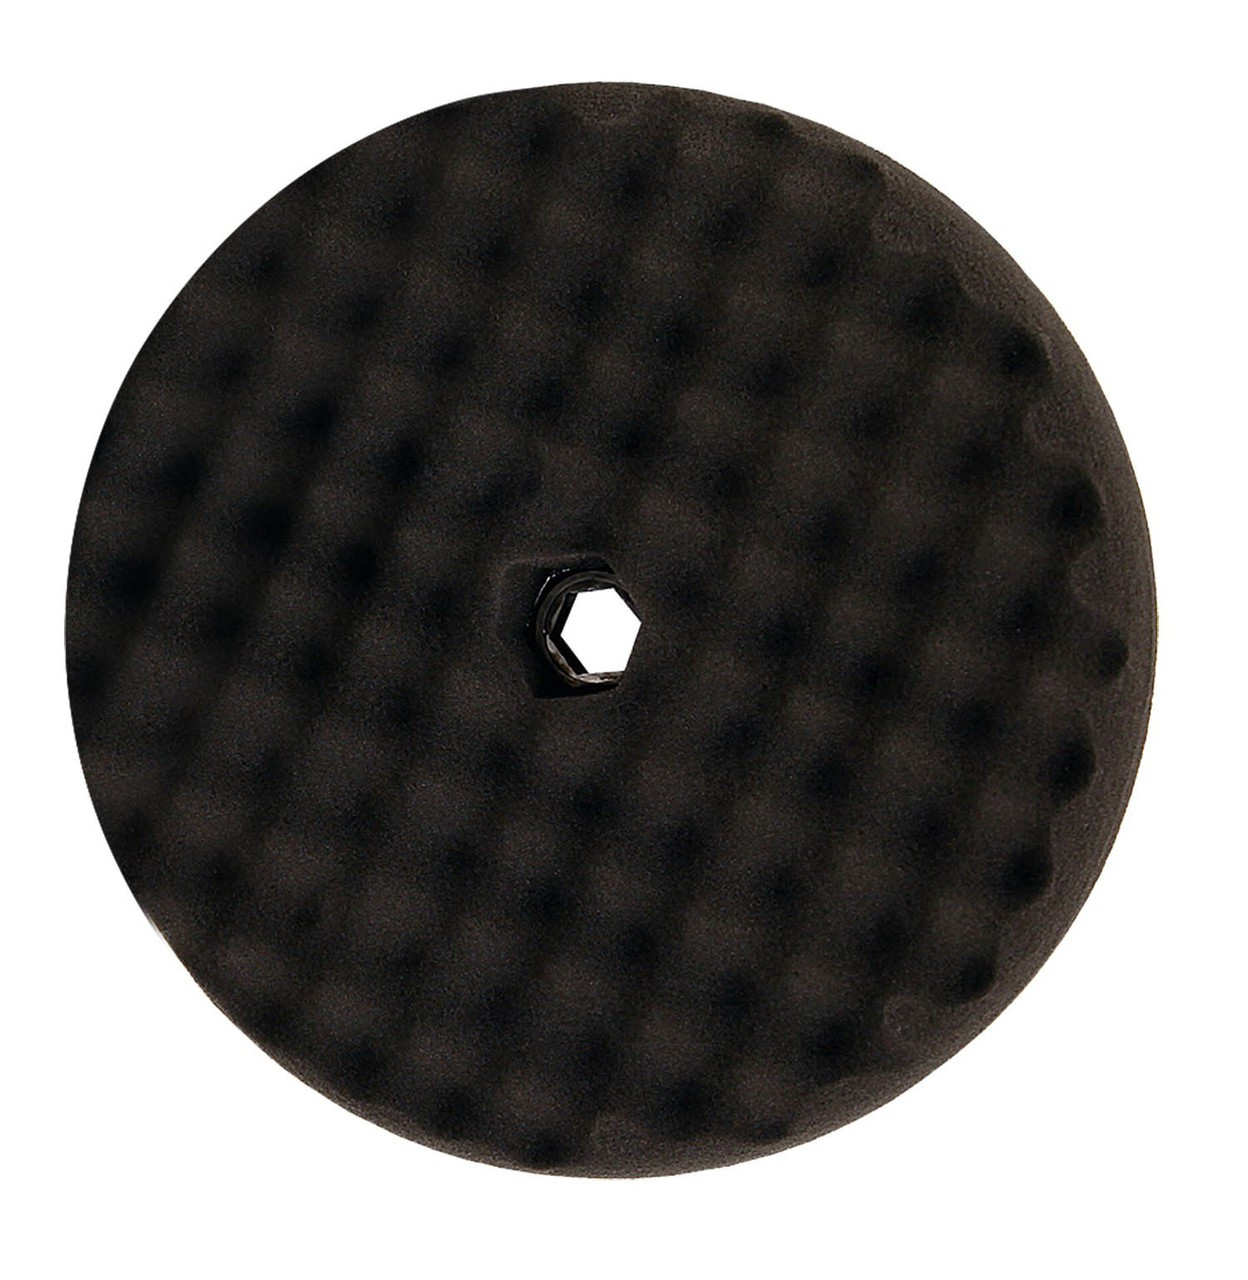 3M™ Wool Compounding Pad, 05703, 8 in (20.32 cm)